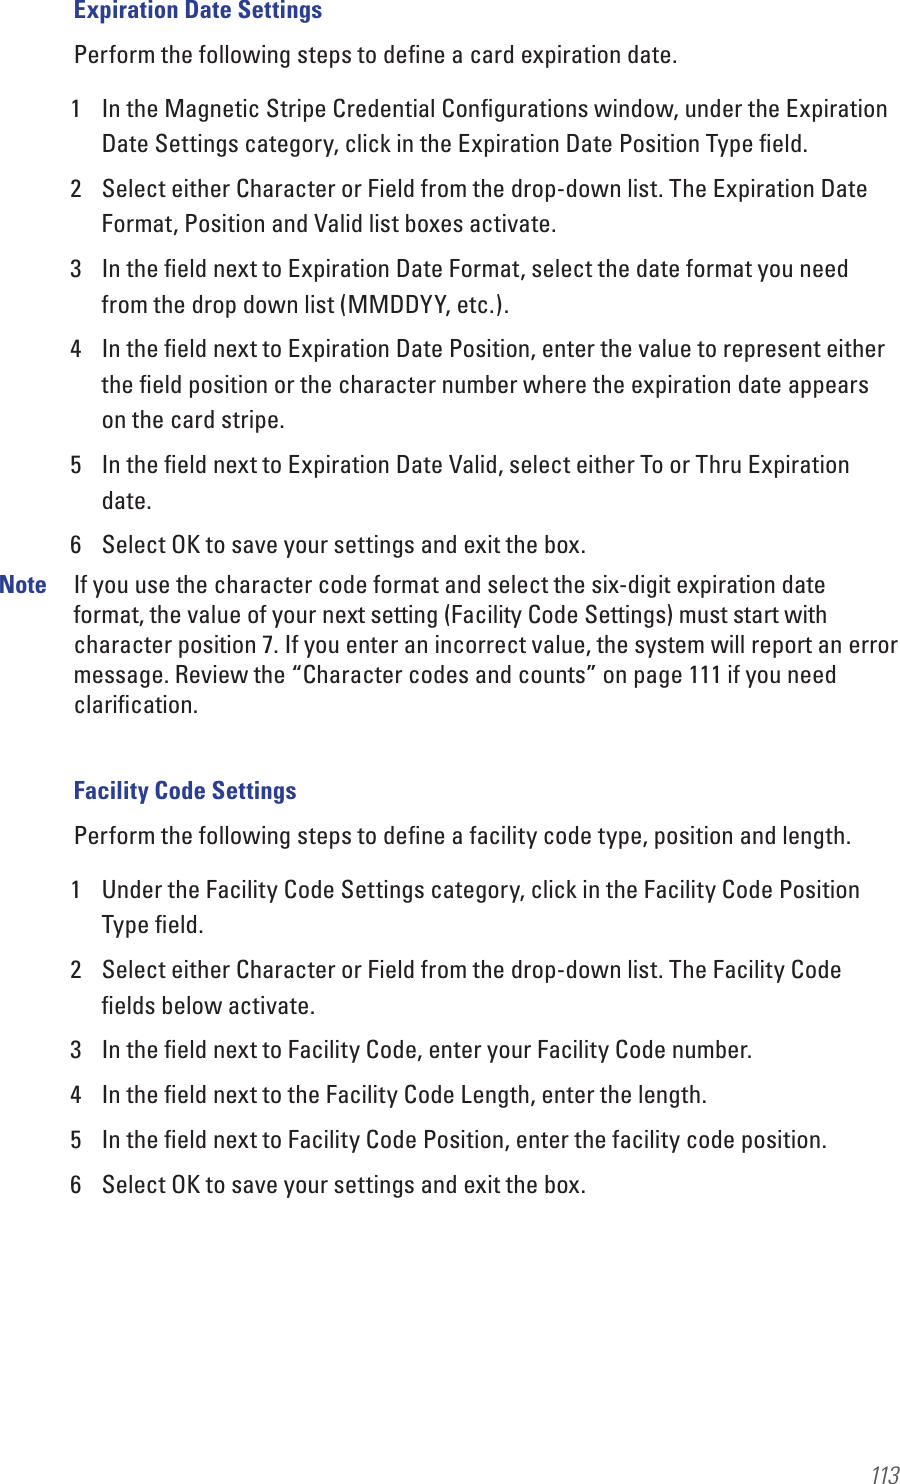 113Expiration Date SettingsPerform the following steps to deﬁne a card expiration date.1  In the Magnetic Stripe Credential Conﬁgurations window, under the Expiration Date Settings category, click in the Expiration Date Position Type ﬁeld.2  Select either Character or Field from the drop-down list. The Expiration Date Format, Position and Valid list boxes activate.3  In the ﬁeld next to Expiration Date Format, select the date format you need from the drop down list (MMDDYY, etc.).4  In the ﬁeld next to Expiration Date Position, enter the value to represent either the ﬁeld position or the character number where the expiration date appears on the card stripe.5  In the ﬁeld next to Expiration Date Valid, select either To or Thru Expiration date.6  Select OK to save your settings and exit the box.Note  If you use the character code format and select the six-digit expiration date format, the value of your next setting (Facility Code Settings) must start with character position 7. If you enter an incorrect value, the system will report an error message. Review the “Character codes and counts” on page 111 if you need clariﬁcation.Facility Code SettingsPerform the following steps to deﬁne a facility code type, position and length.1  Under the Facility Code Settings category, click in the Facility Code Position Type ﬁeld.2  Select either Character or Field from the drop-down list. The Facility Code ﬁelds below activate.3  In the ﬁeld next to Facility Code, enter your Facility Code number.4  In the ﬁeld next to the Facility Code Length, enter the length.5  In the ﬁeld next to Facility Code Position, enter the facility code position. 6  Select OK to save your settings and exit the box.